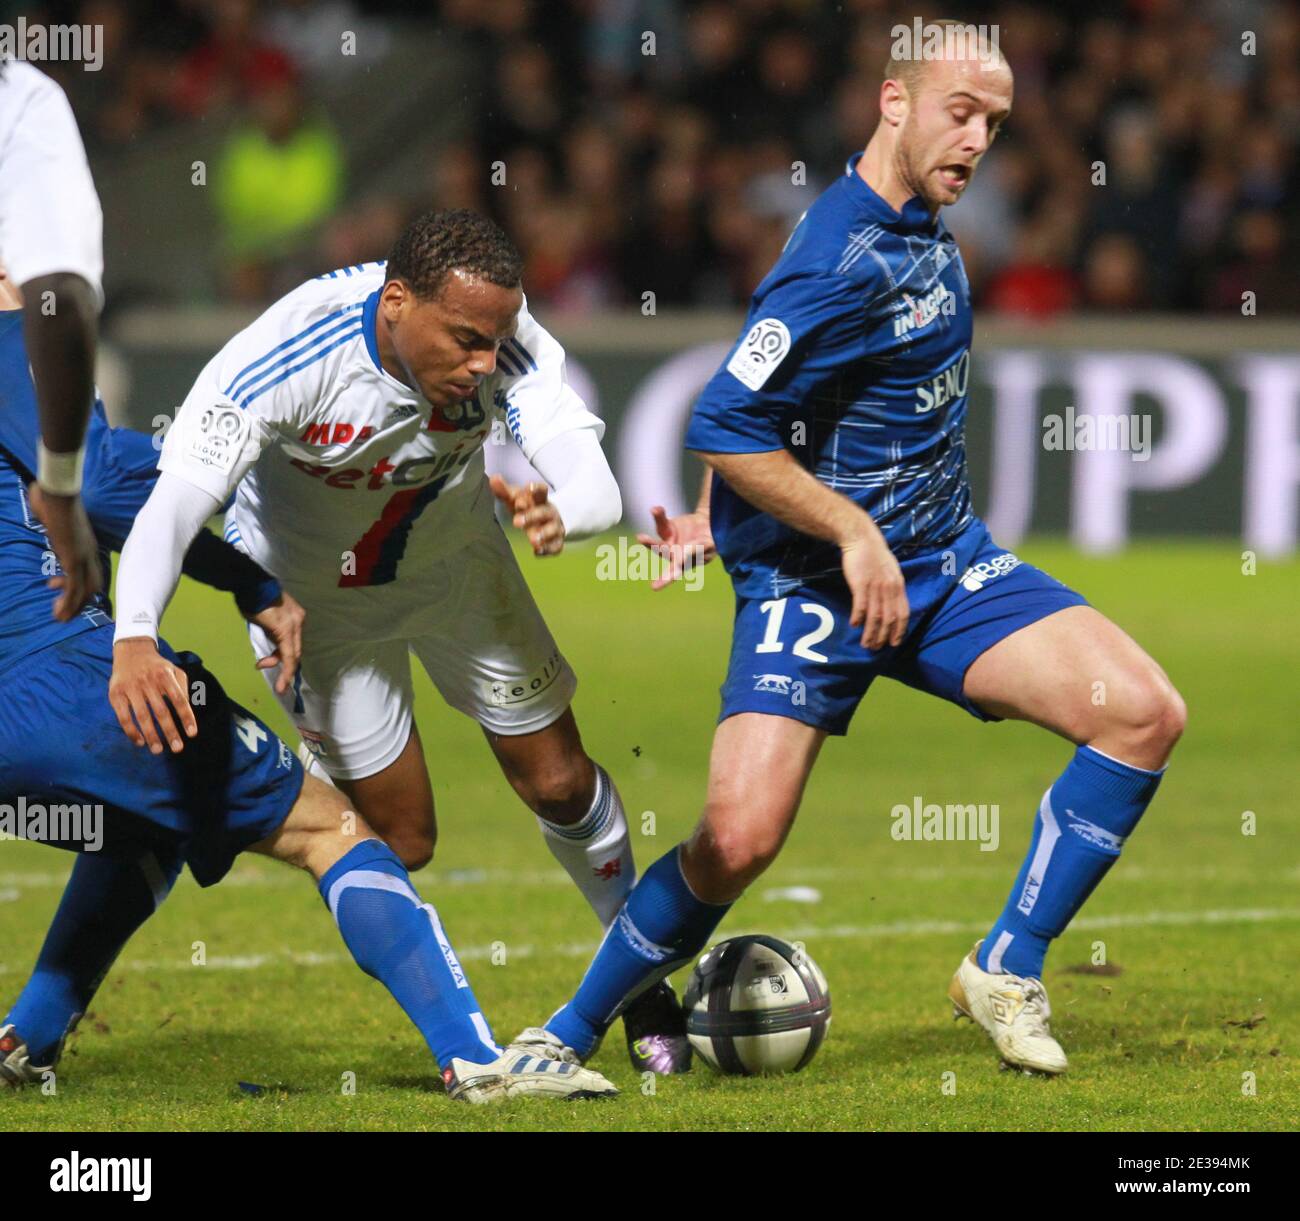 Lyon's Jimmy Briand and Auxerre Jean Pascal Mignot during the French First  League soccer match, Olympique Lyonnais vs AJ Auxerre at Gerland Stadium in  Lyon, France on December 22, 2010. The match